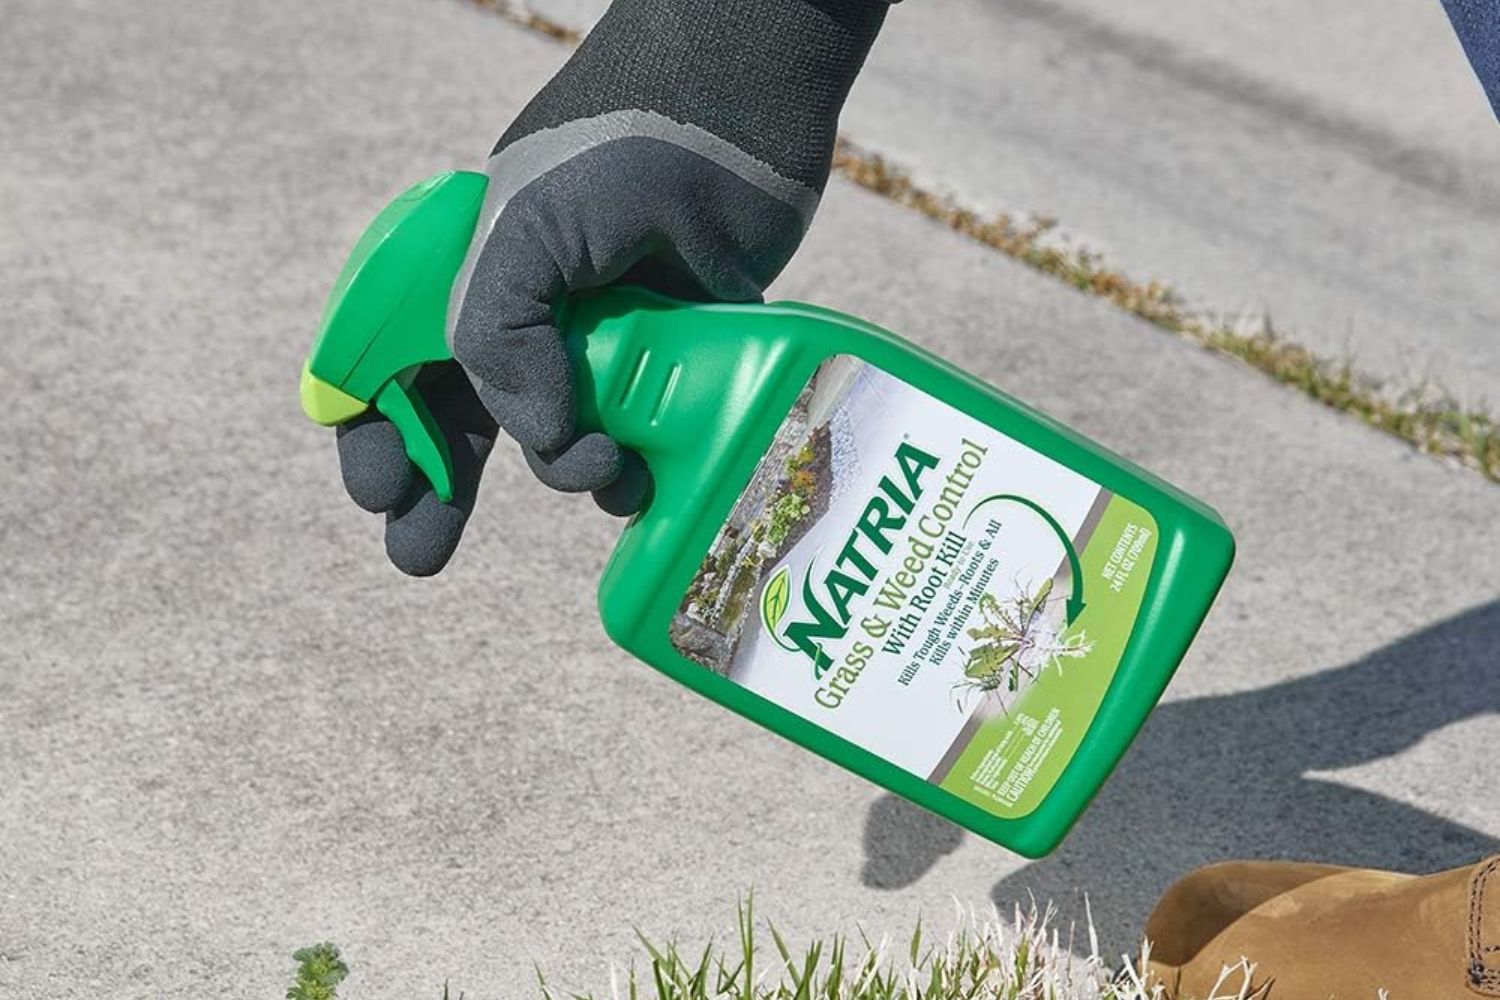 A person wearing gloves while holding the Natria Grass and Weed Control With Root Kill over a grassy area next to a sidewalk.